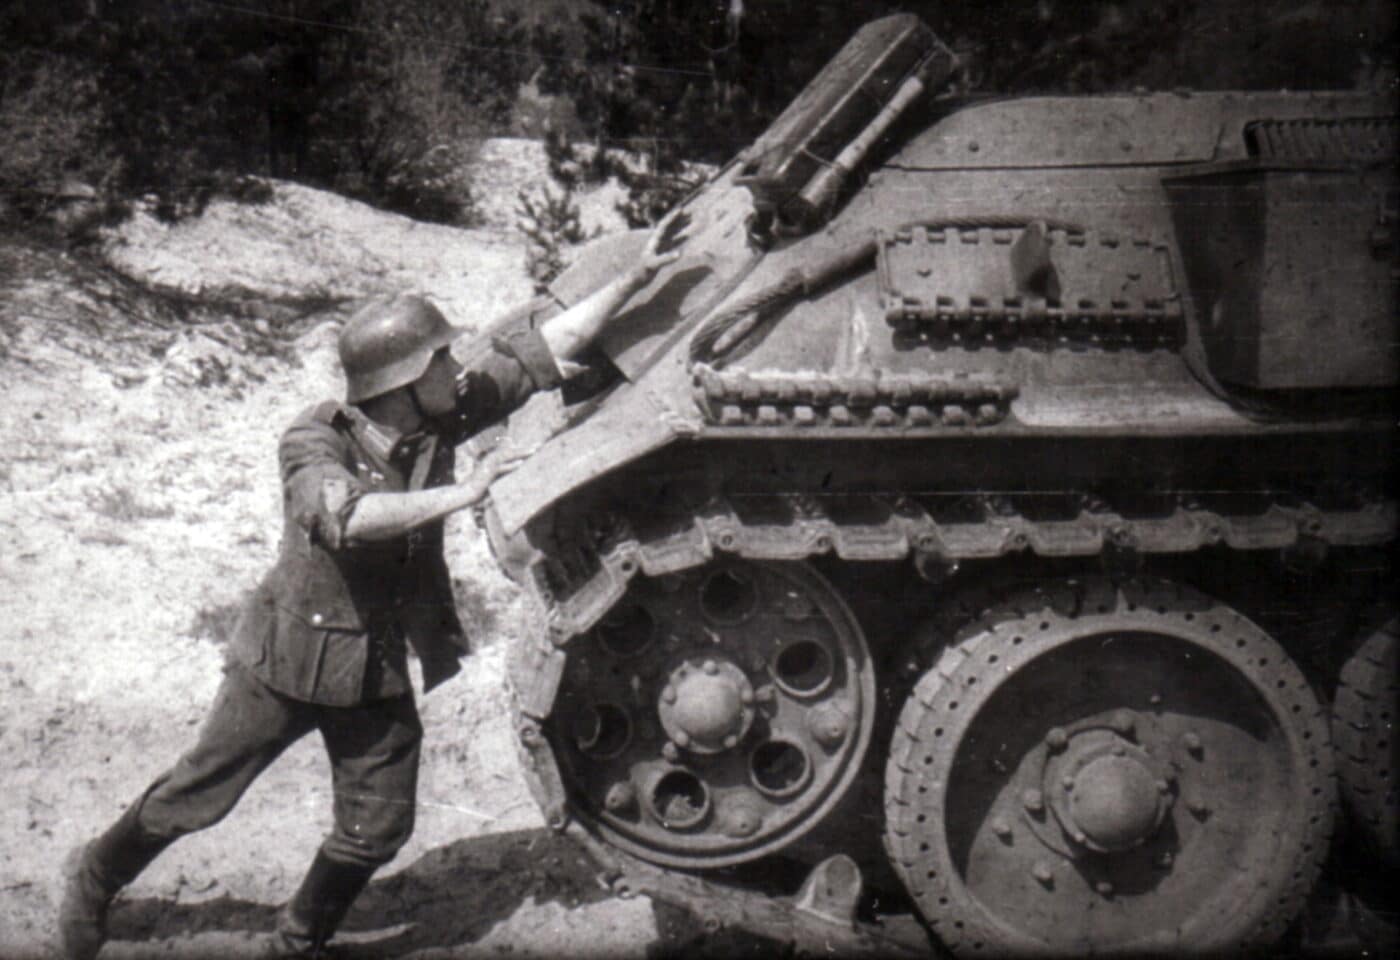 A scene from a German wartime training film: in this scenario the tank hunter uses a five-gallon Jerrycan equipped with a standard hand grenade as a detonator